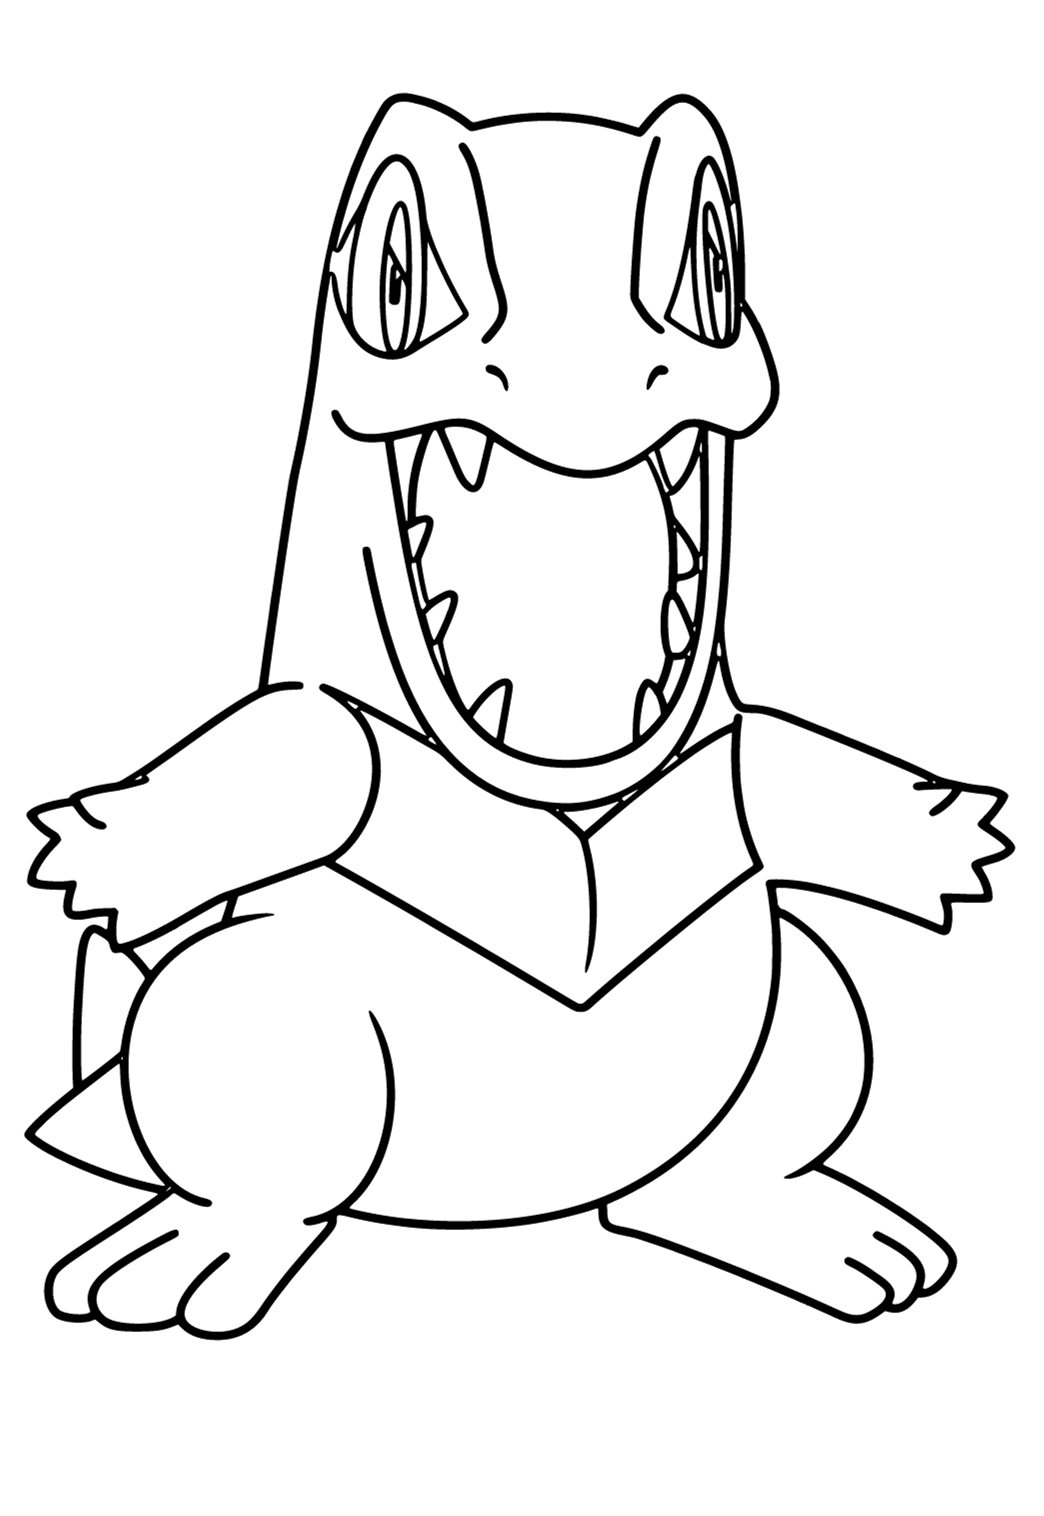 Free printable pokemon teeth coloring page for adults and kids